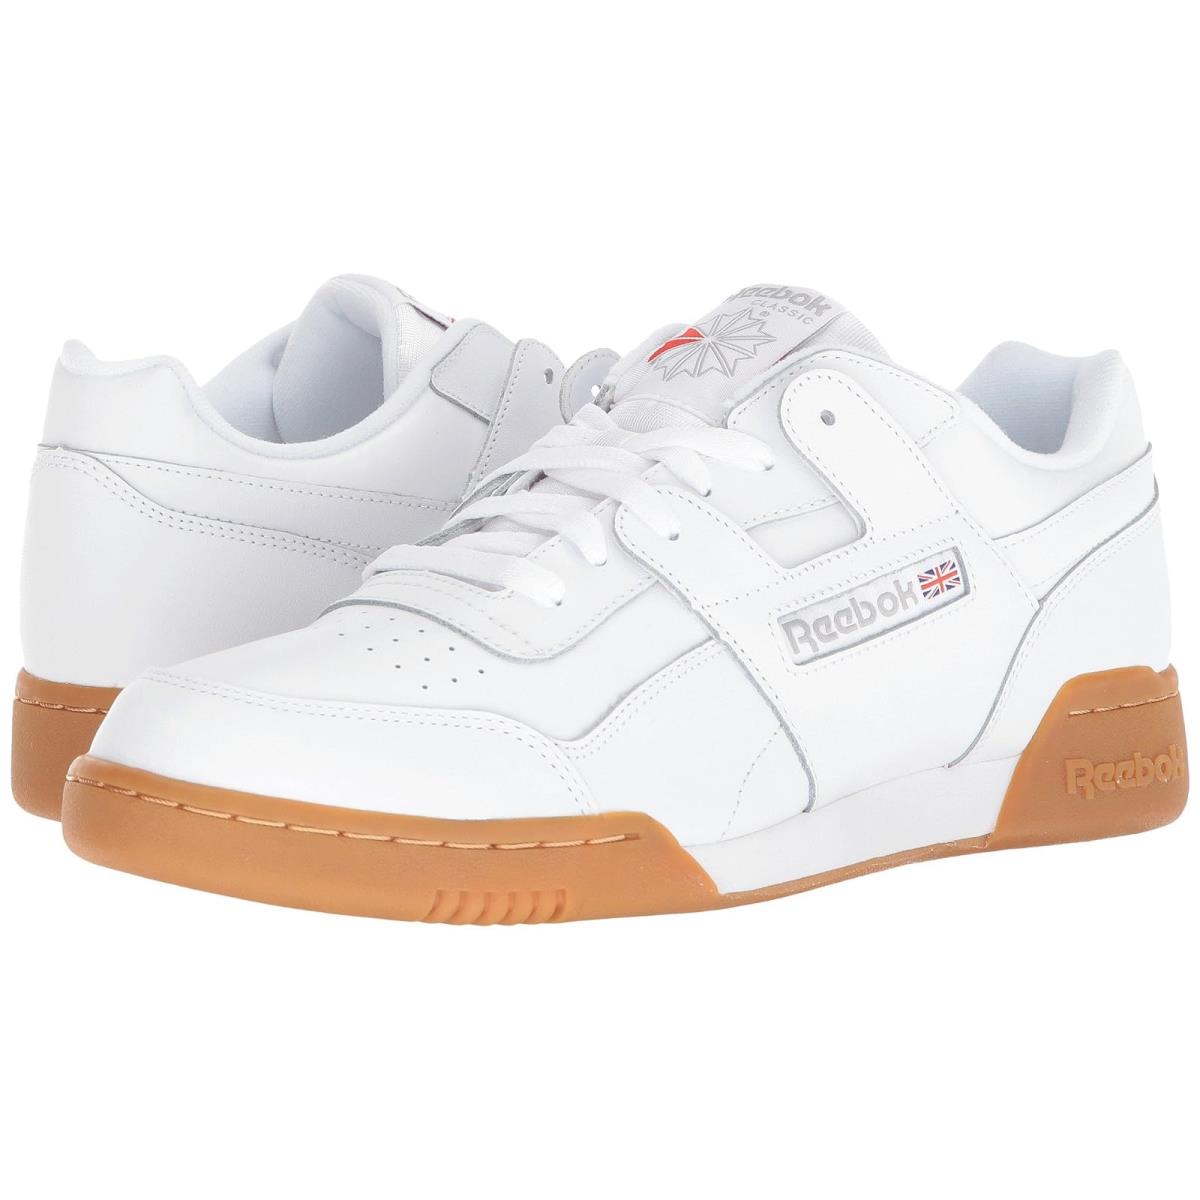 Man`s Sneakers Athletic Shoes Reebok Lifestyle Workout Plus White/Carbon/Classic Red/Reebok Royal/Gum